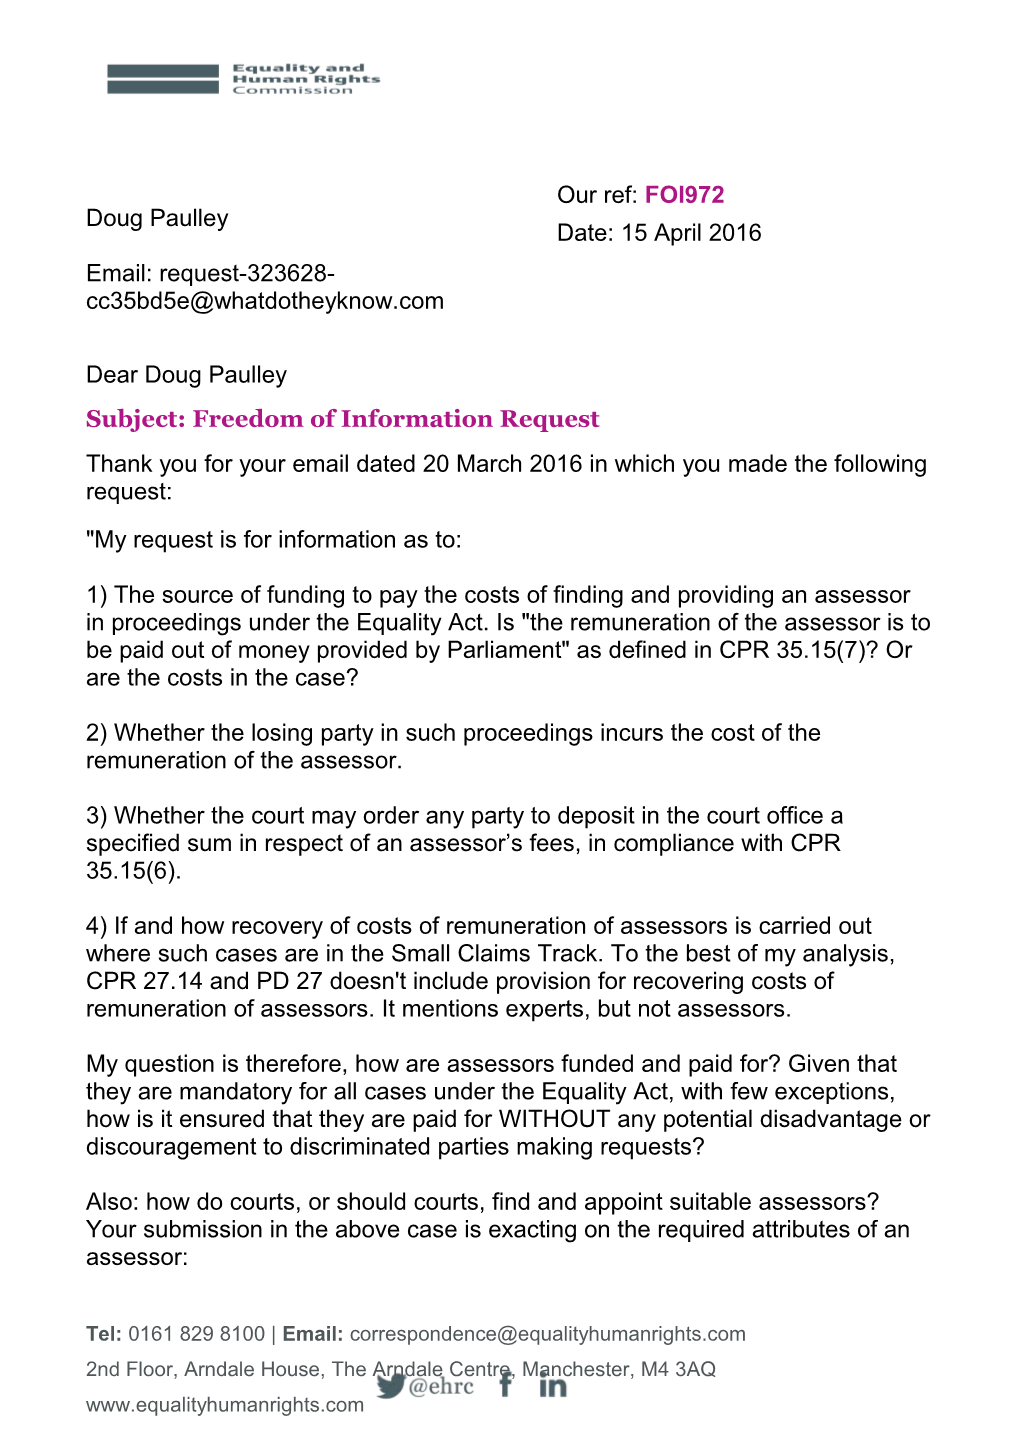 Subject: Freedom of Information Request